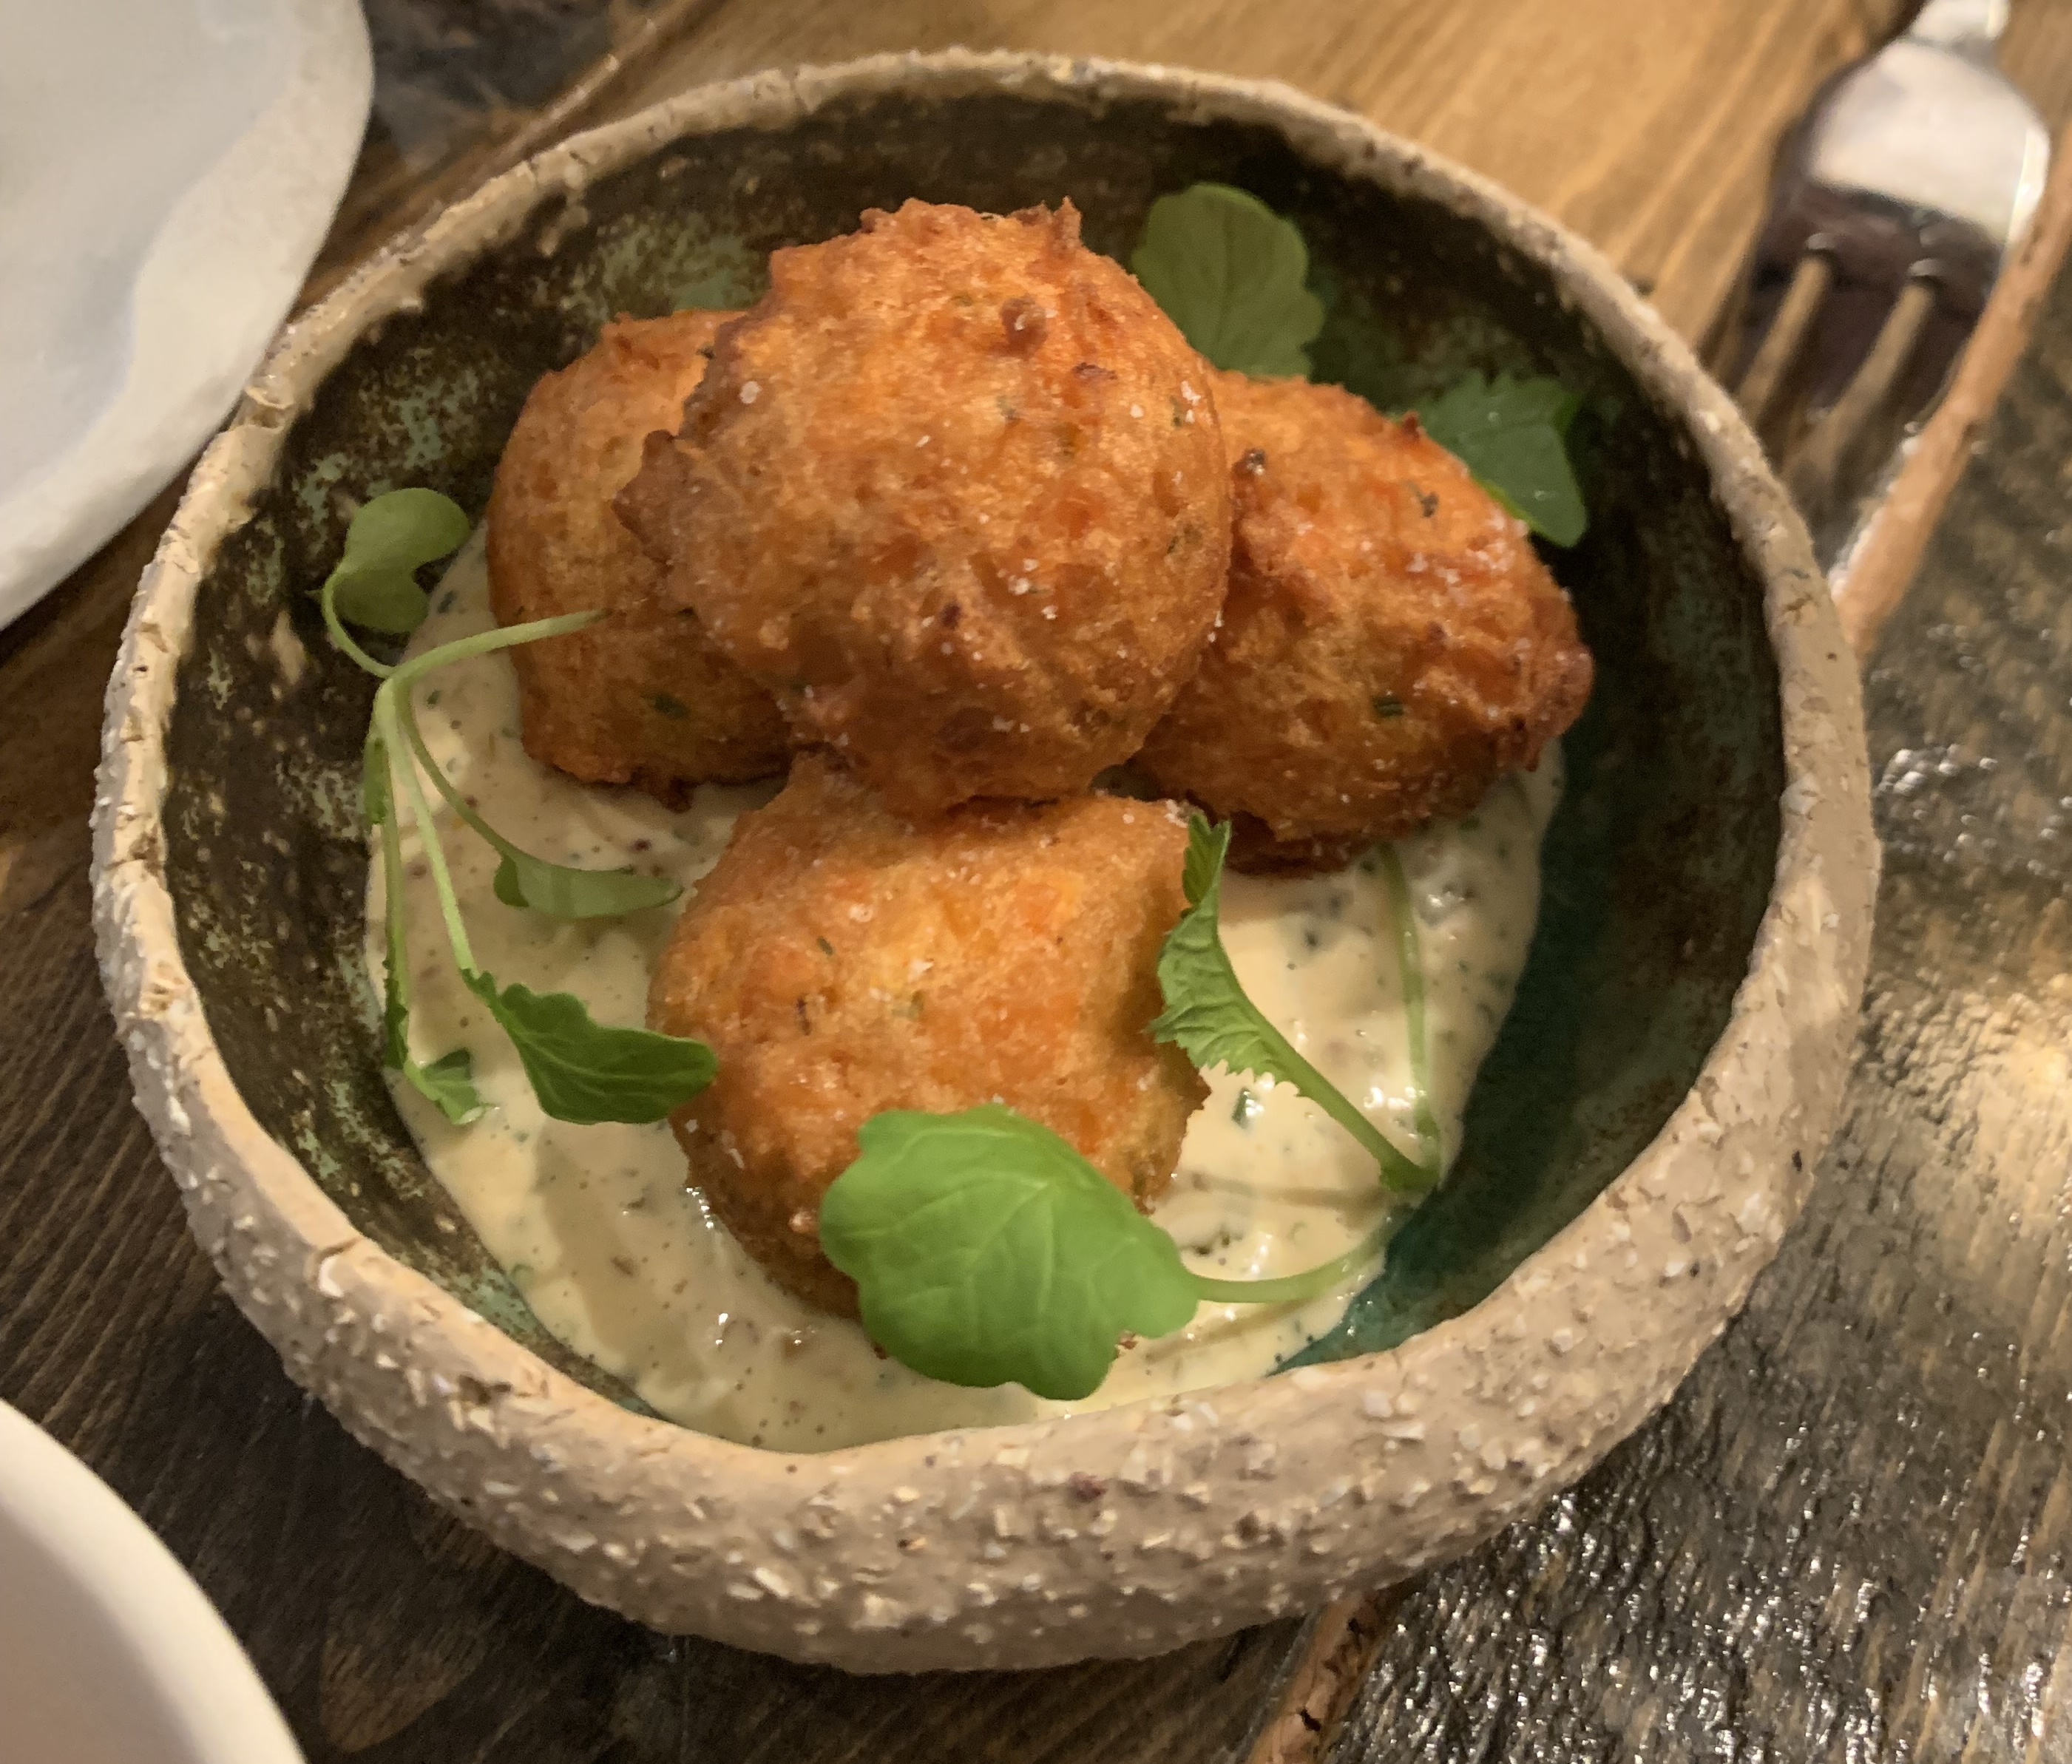 A bowl of four fried balls, crispy and golden. Three balls sit in a pale sauce with flecks of green in it; the fourth ball sits on top of the other three, forming a pyramid. The dish is garnished with three sprigs of delicate-looking green herbs with wide leaves.